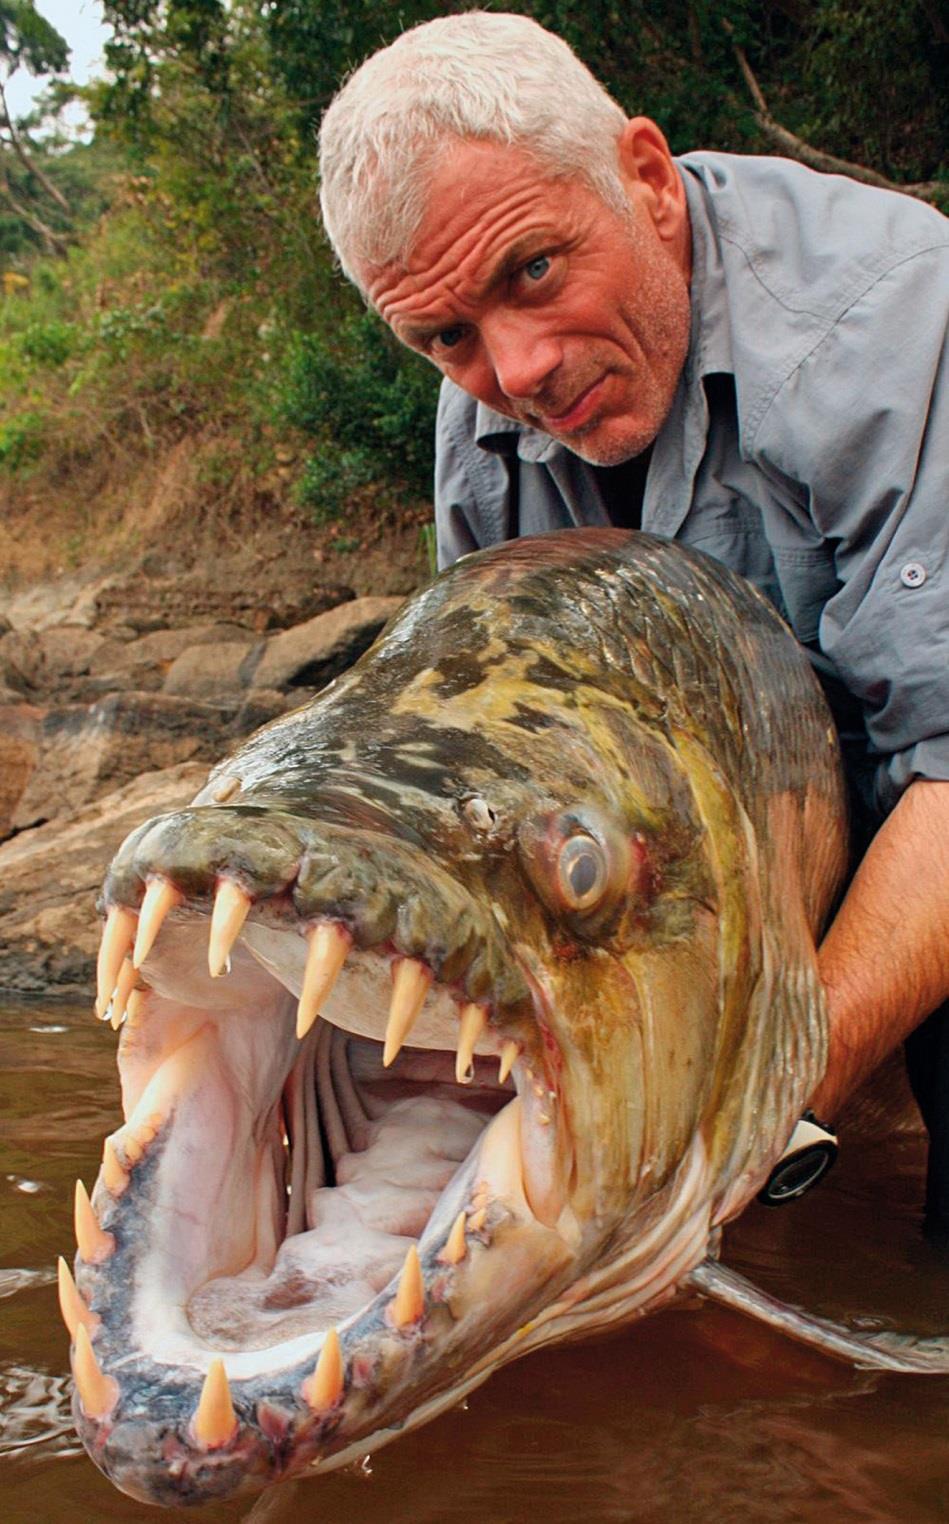 Human predators Human predators tend to remove the largest, strongest individuals E.g., sport fishers keep big ones and release the small ones (Donaldson et al.